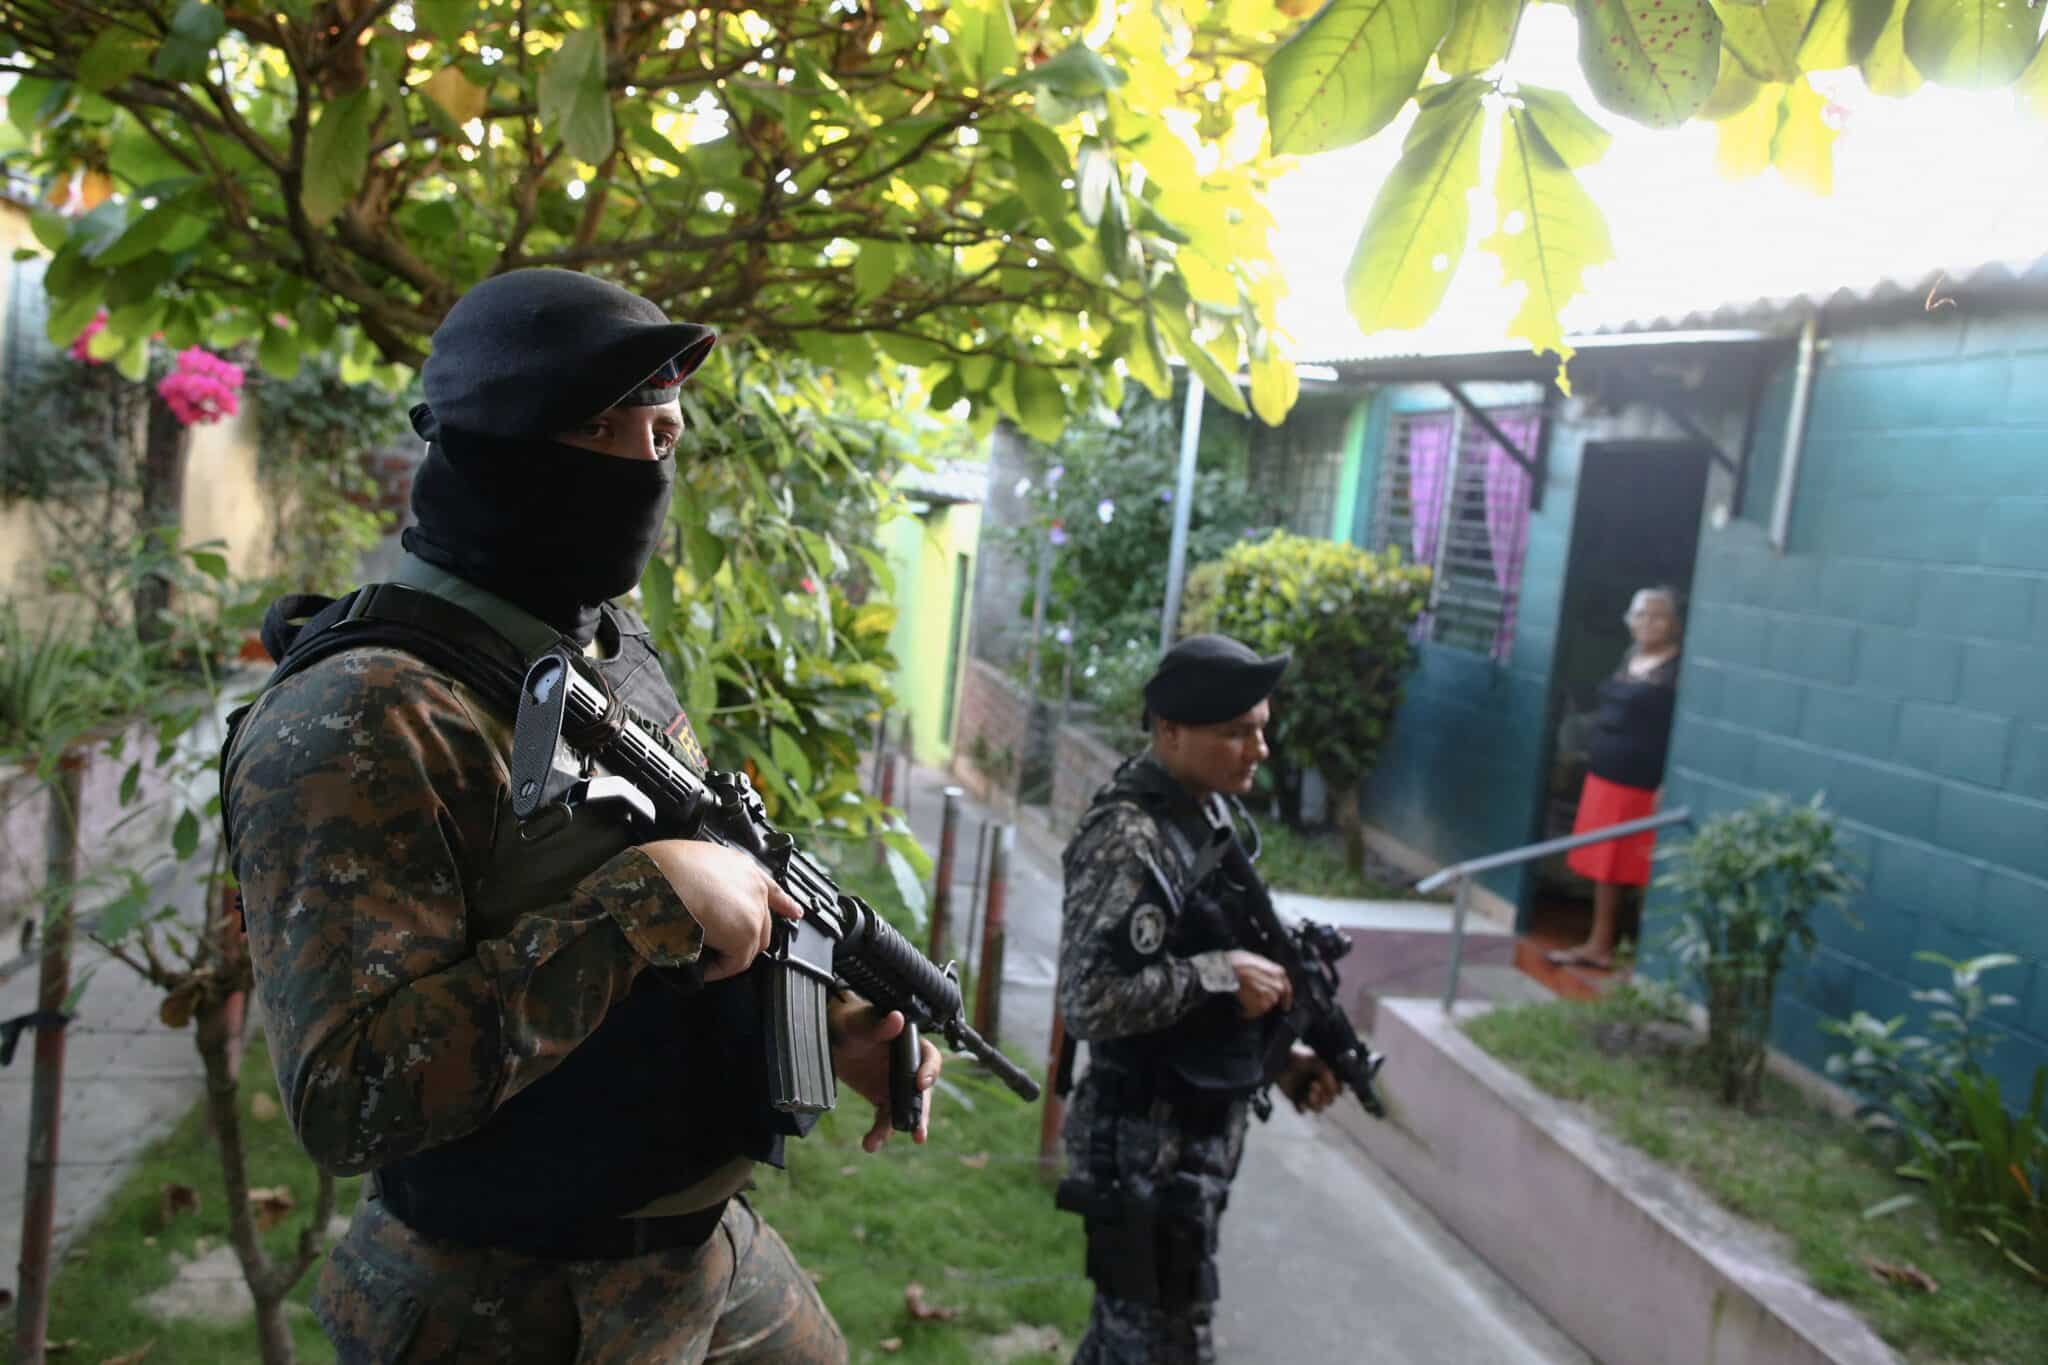 An elderly woman stands in her doorway as armed Salvadoran troops patrol a residential area in Soyapango Dec. 5, 2022. A massive crackdown on gangs in El Salvador has led to ongoing human rights abuses, says a new report. (CNS photo/Jose Cabezas, Reuters)